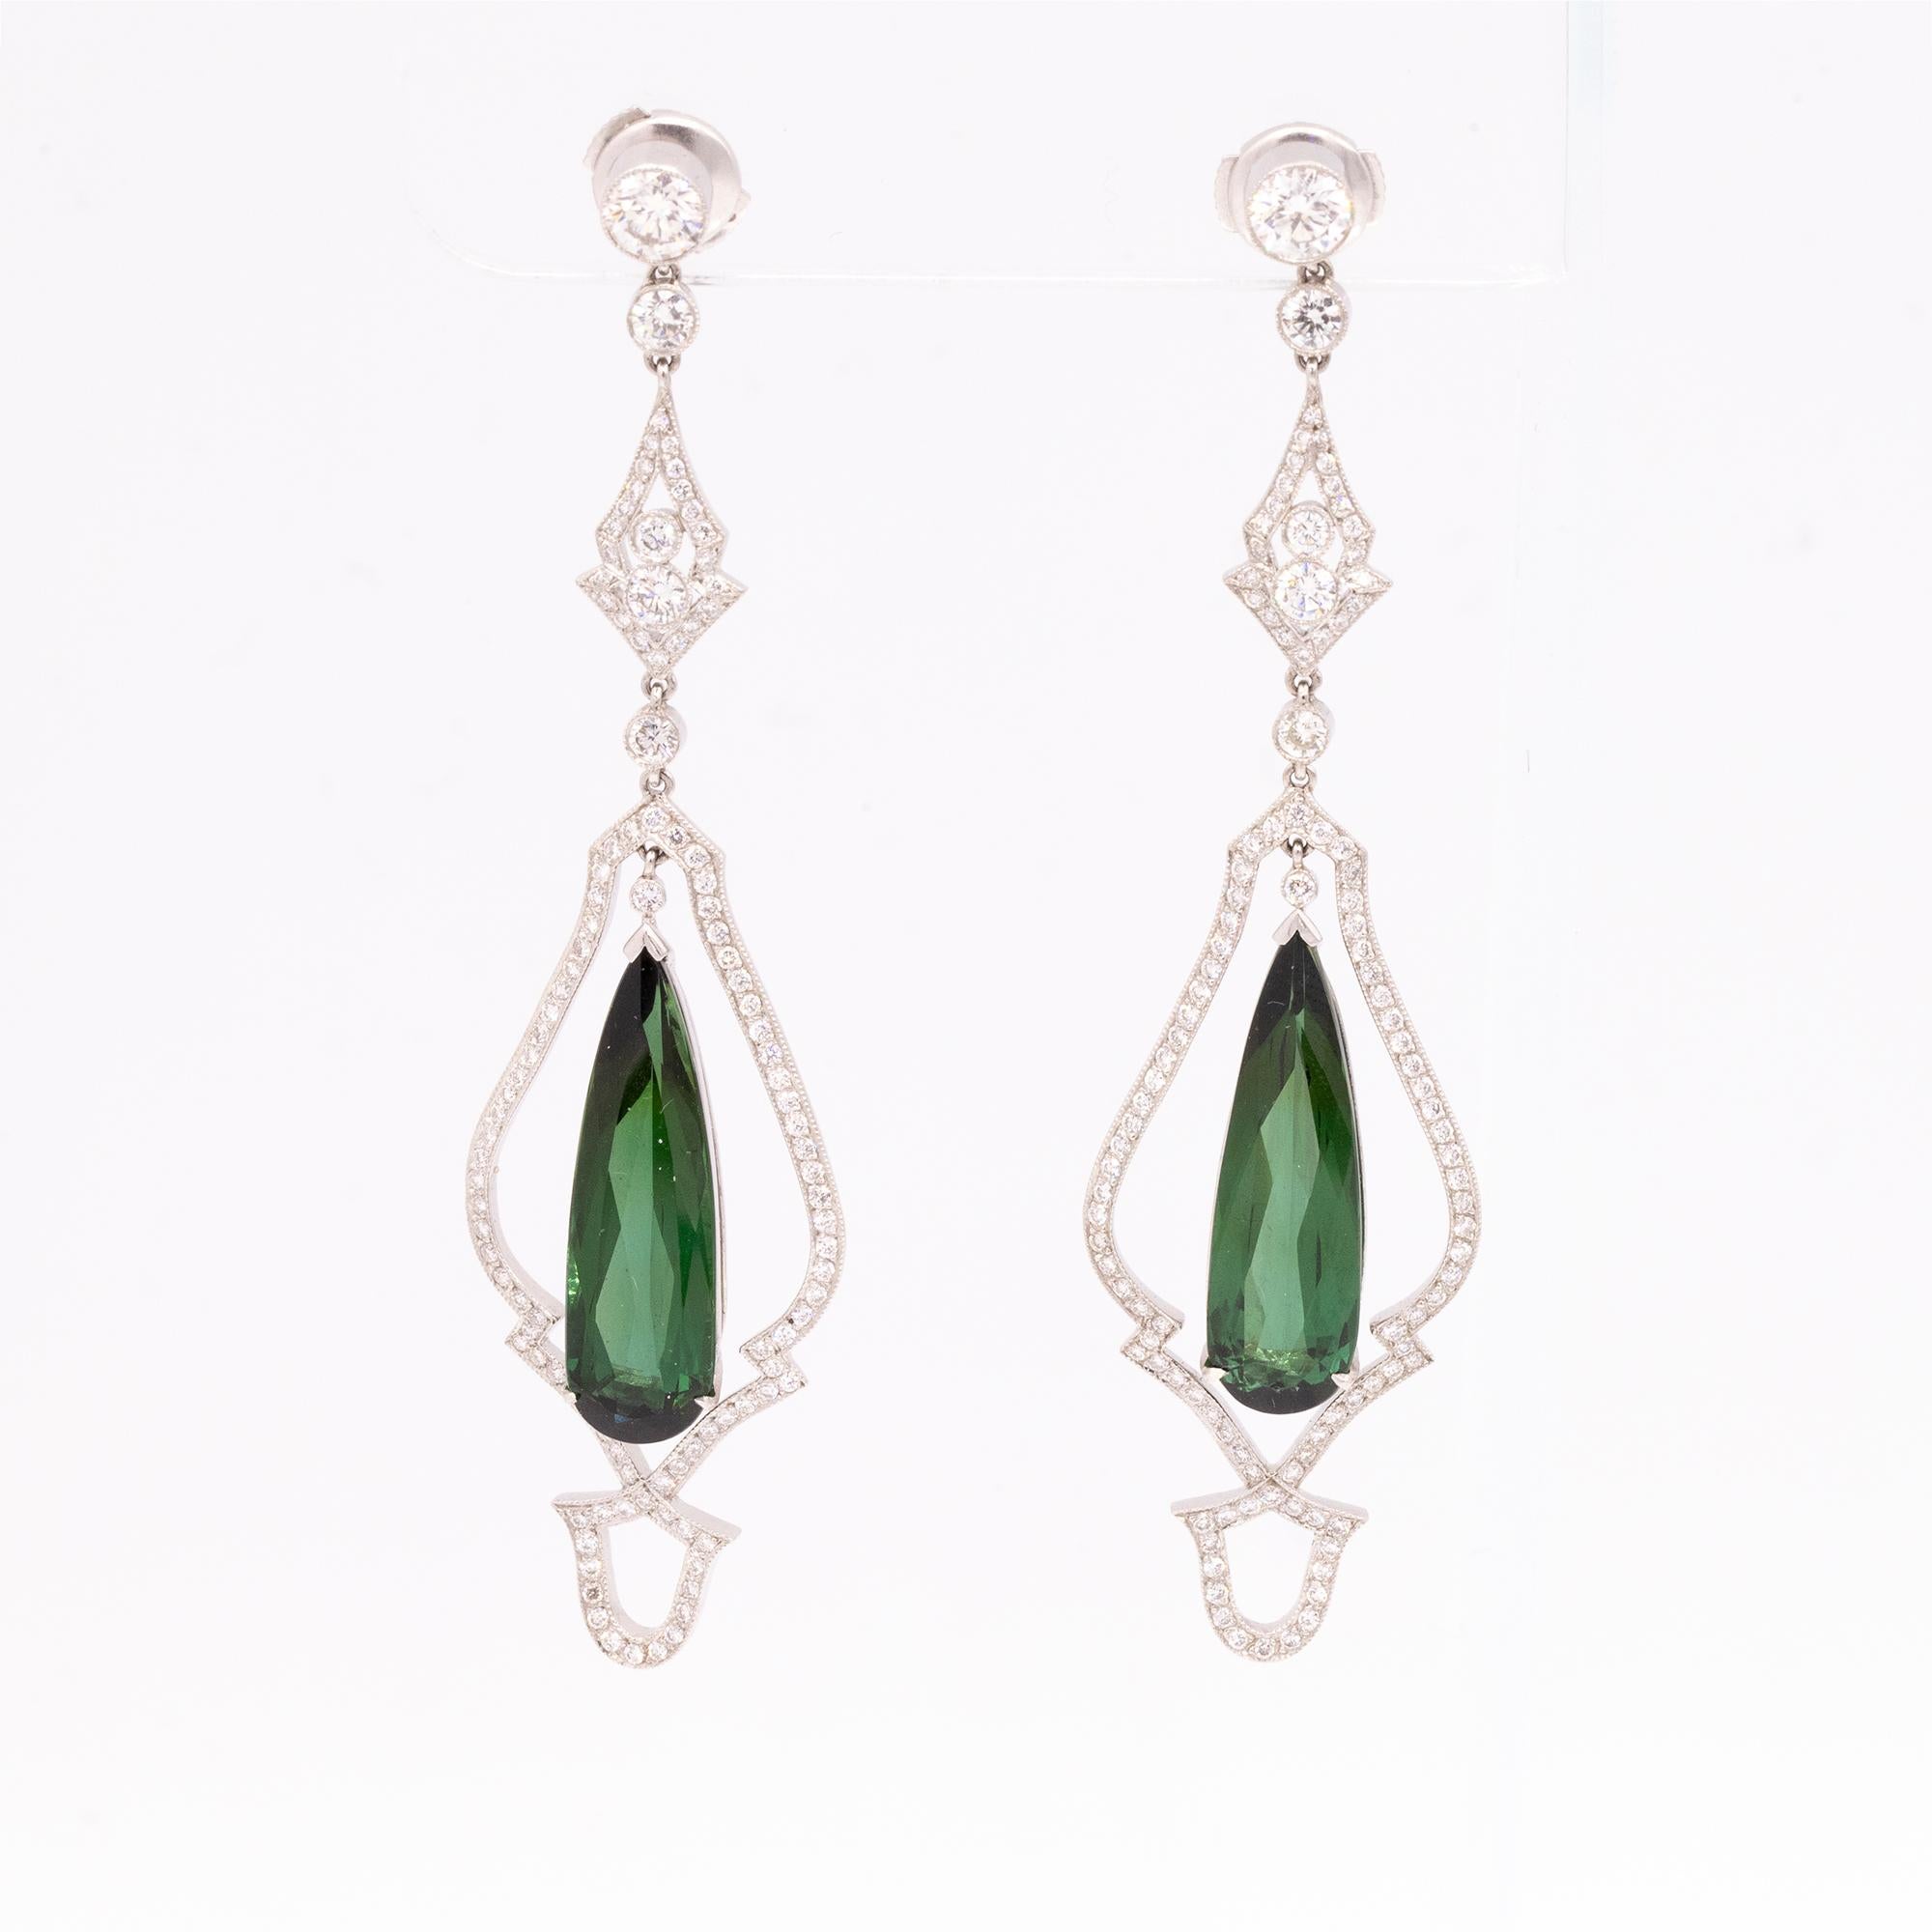 From our Heritage Collection, these stunning earrings epitomize show-stopping glamour and elegance. Presenting pear-shape green tourmalines with a brilliant diamond frame and top, these earrings are the height of craftsmanship and design. With fine